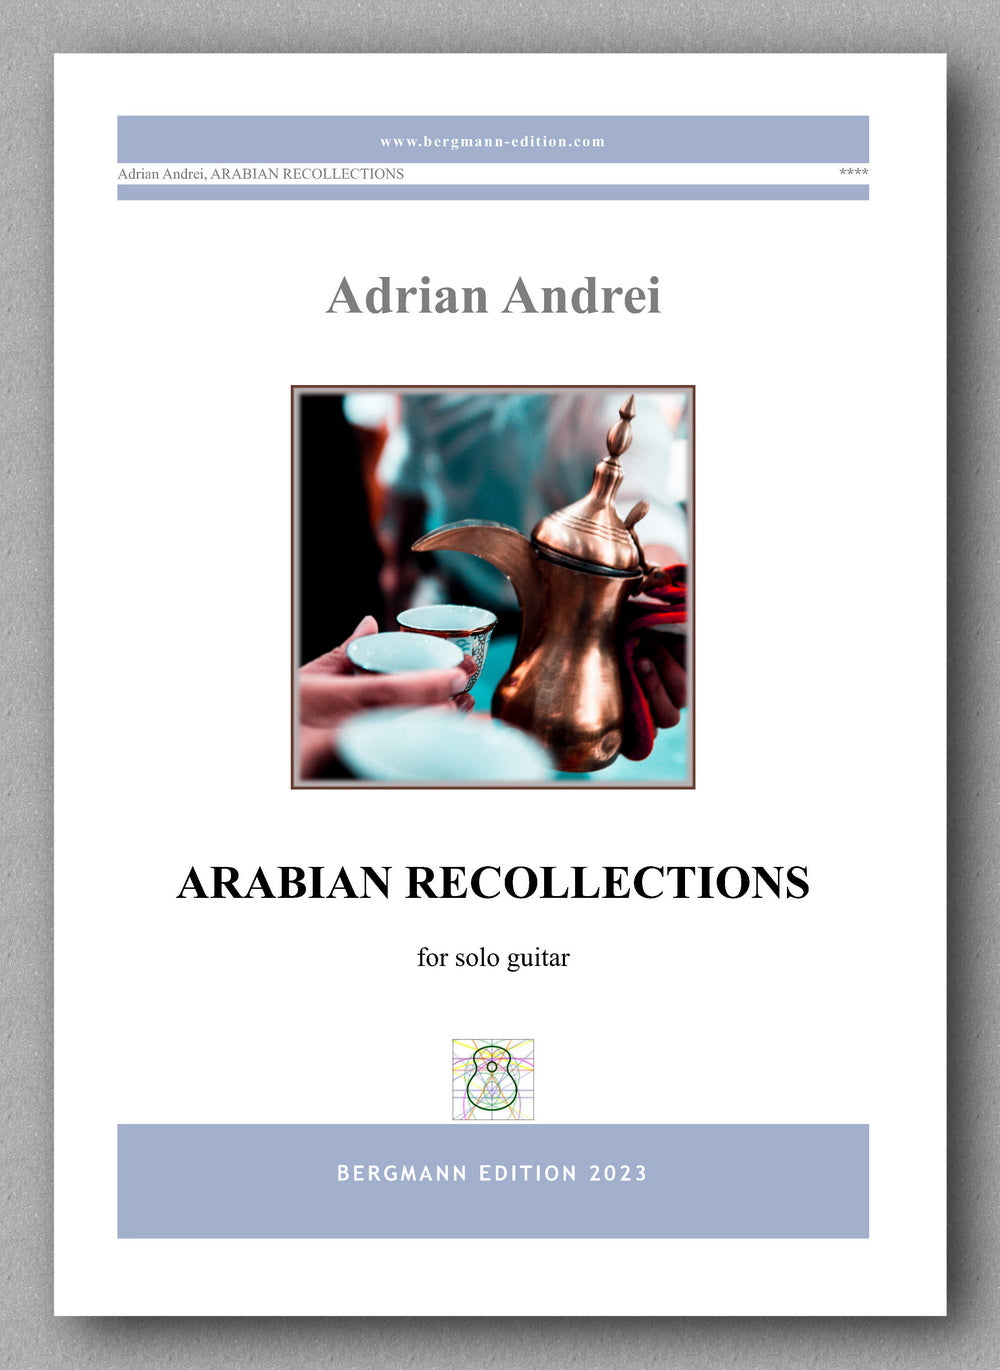 Adrian Andrei, Arabian Recollections - preview of the cover